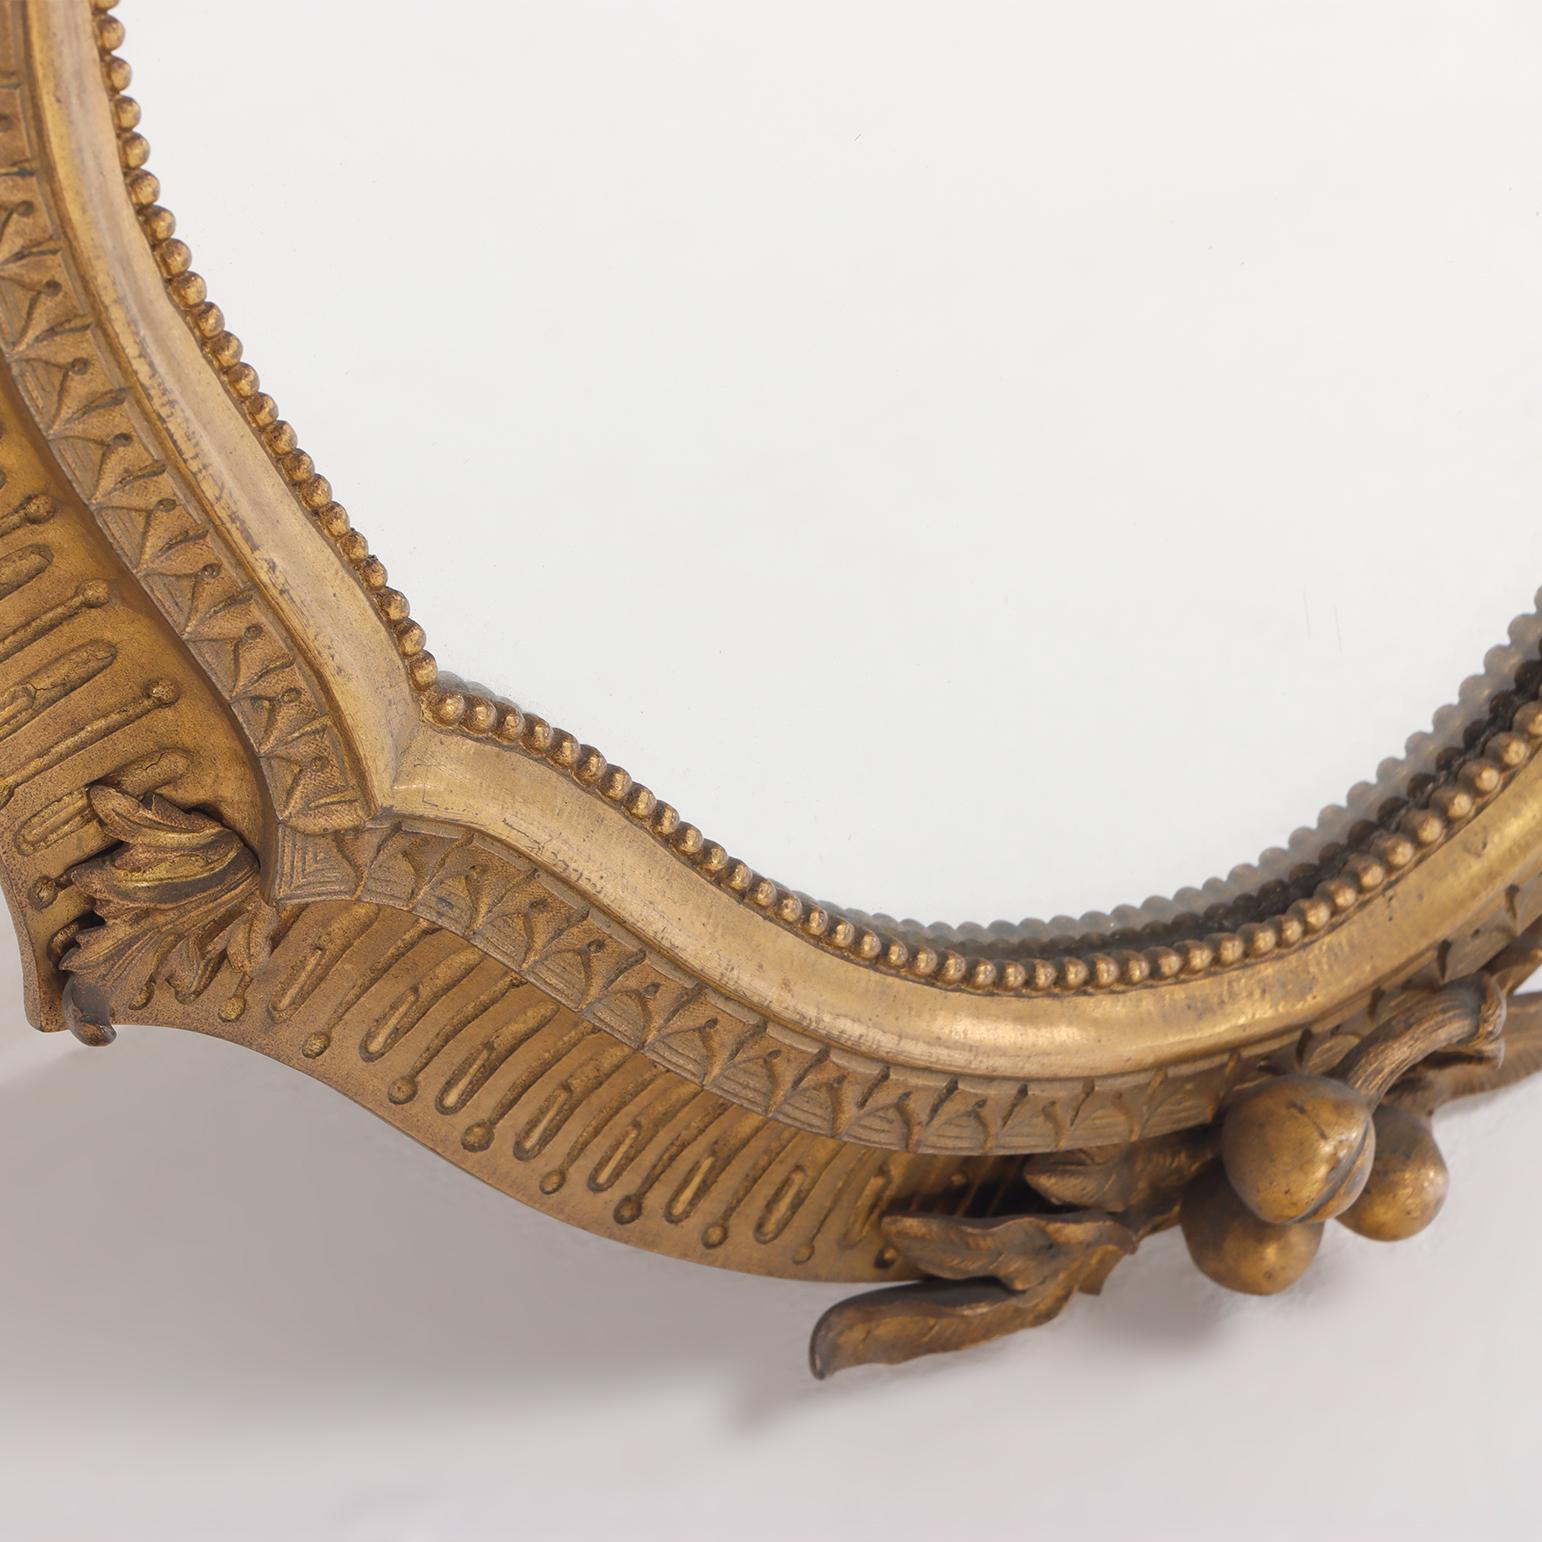 A quality cast bronze French wall mirror with nicely detailed border circa 1900. 1